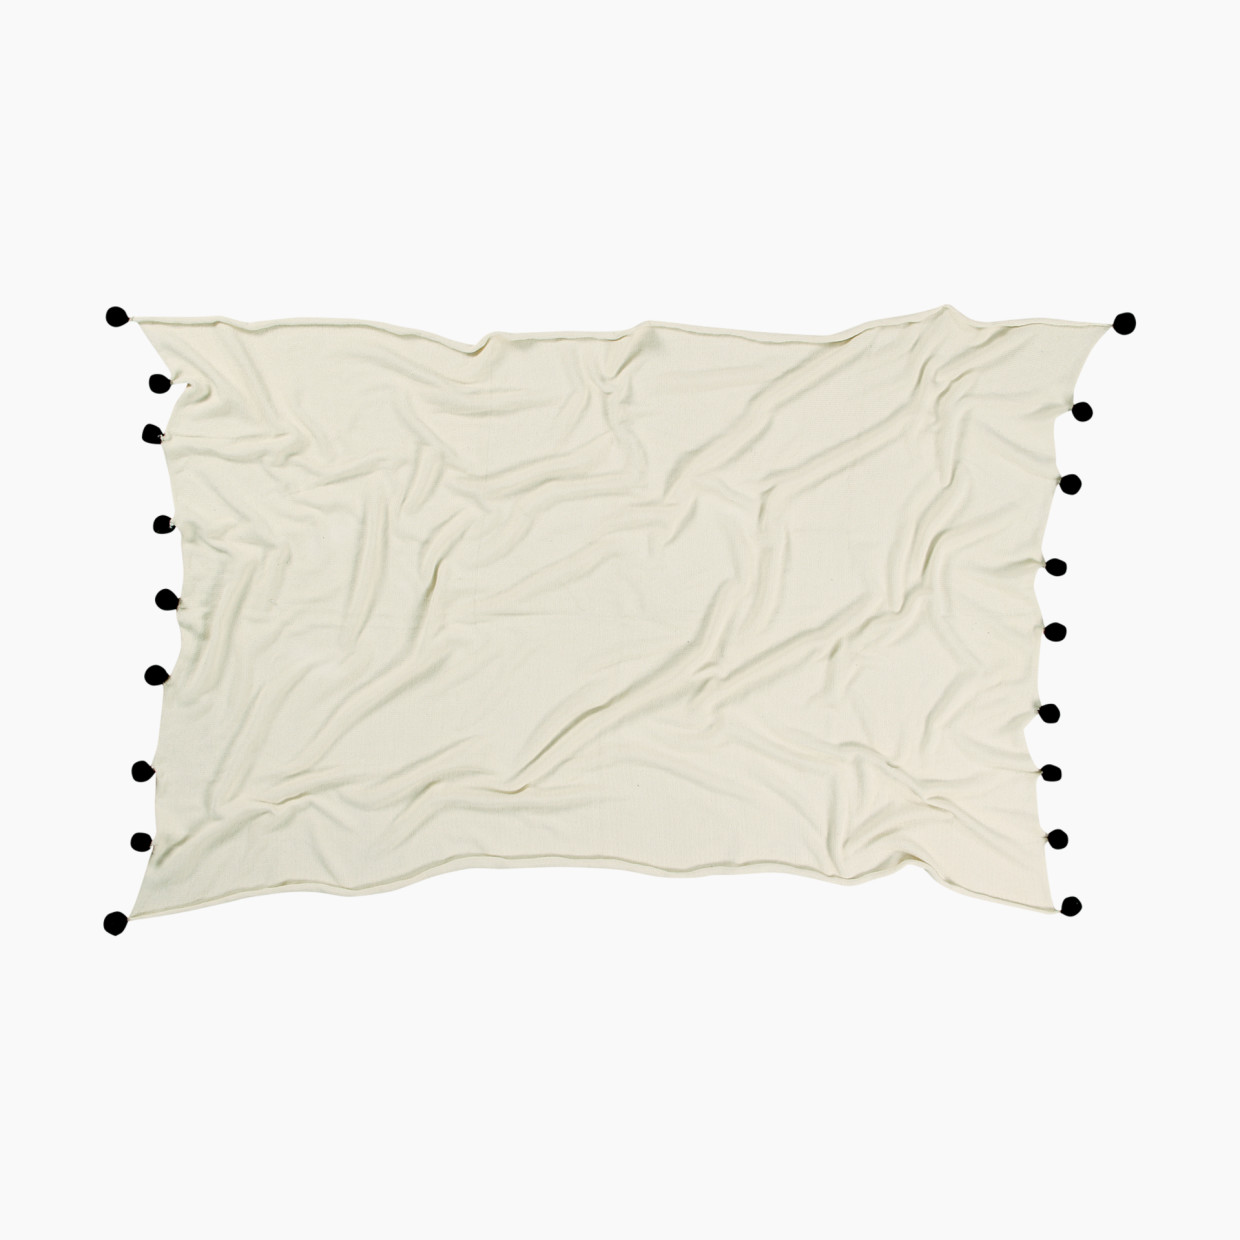 Lorena Canals Cotton Bubbly Blanket - Natural/Black.